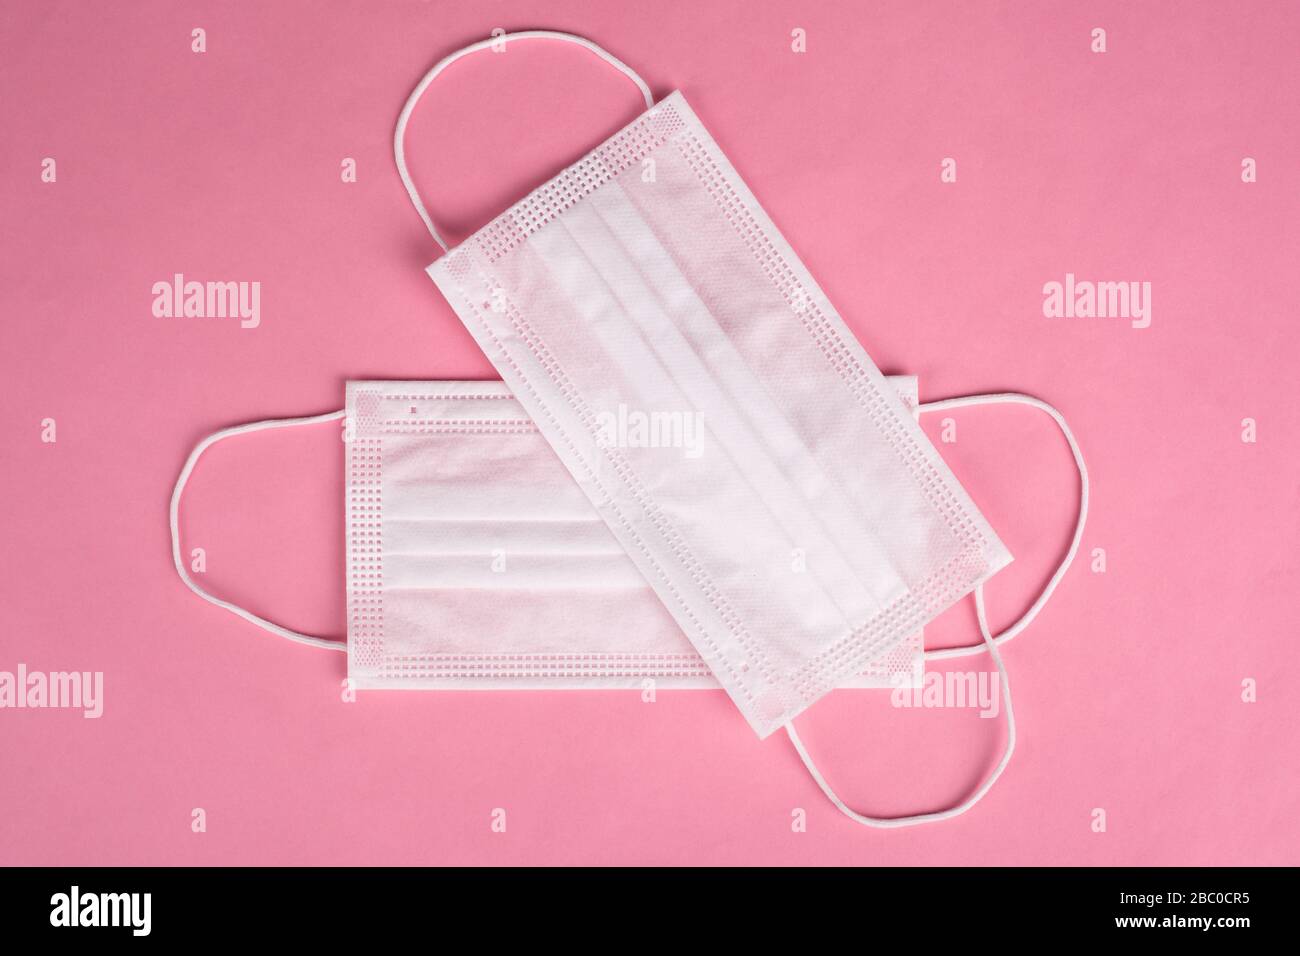 white protective medical masks on a pink background. Covid-19 pandemic 2020. Stock Photo